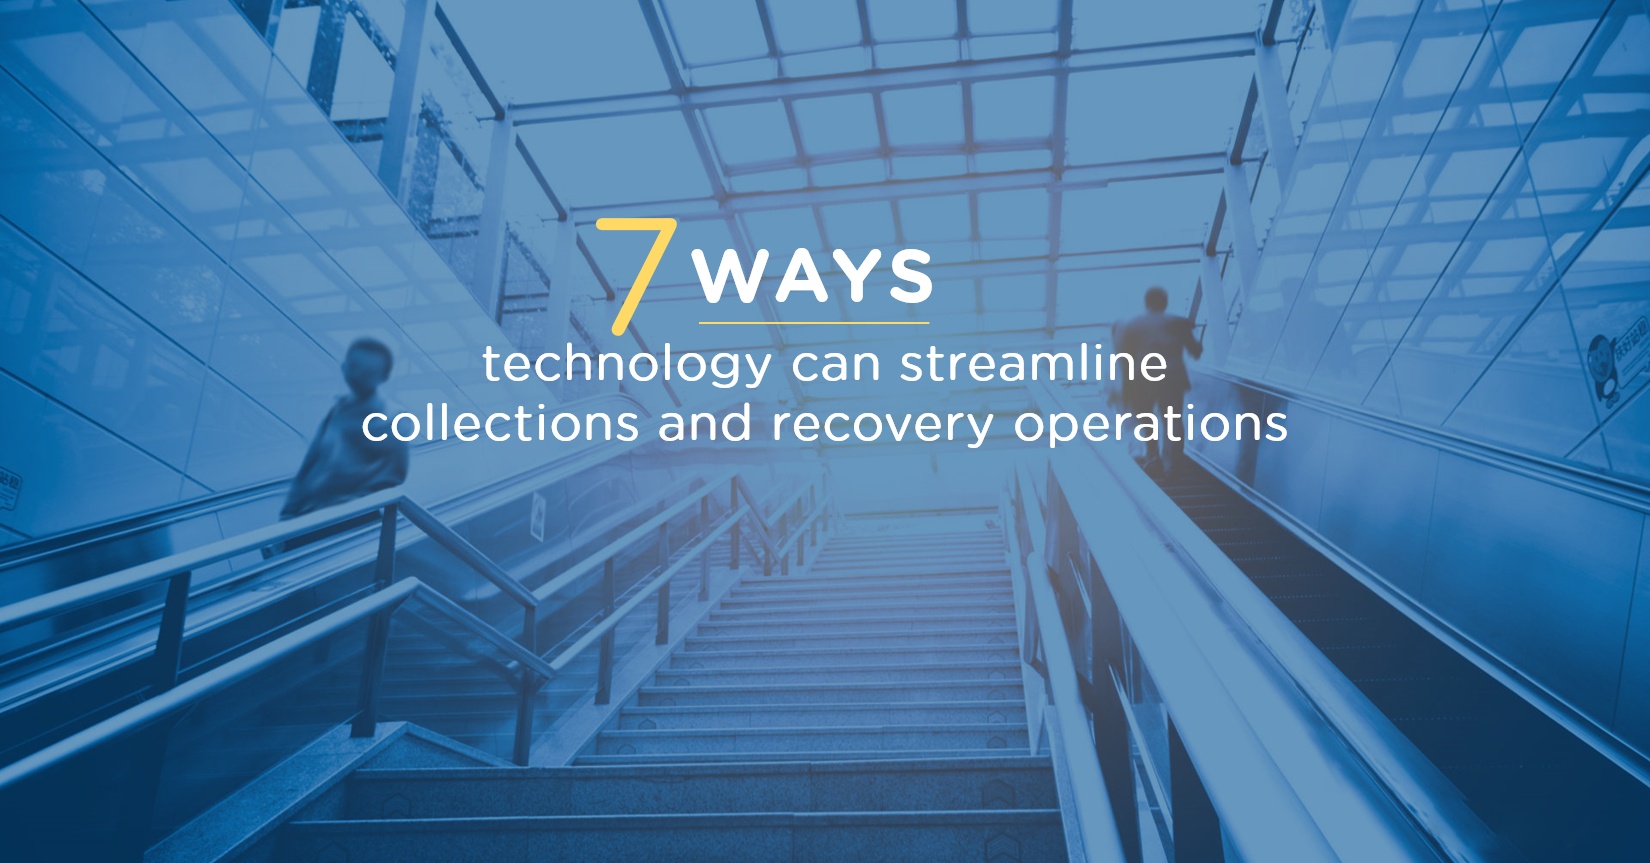 [Slideshare] 7 ways technology can streamline debt collection and recovery operations